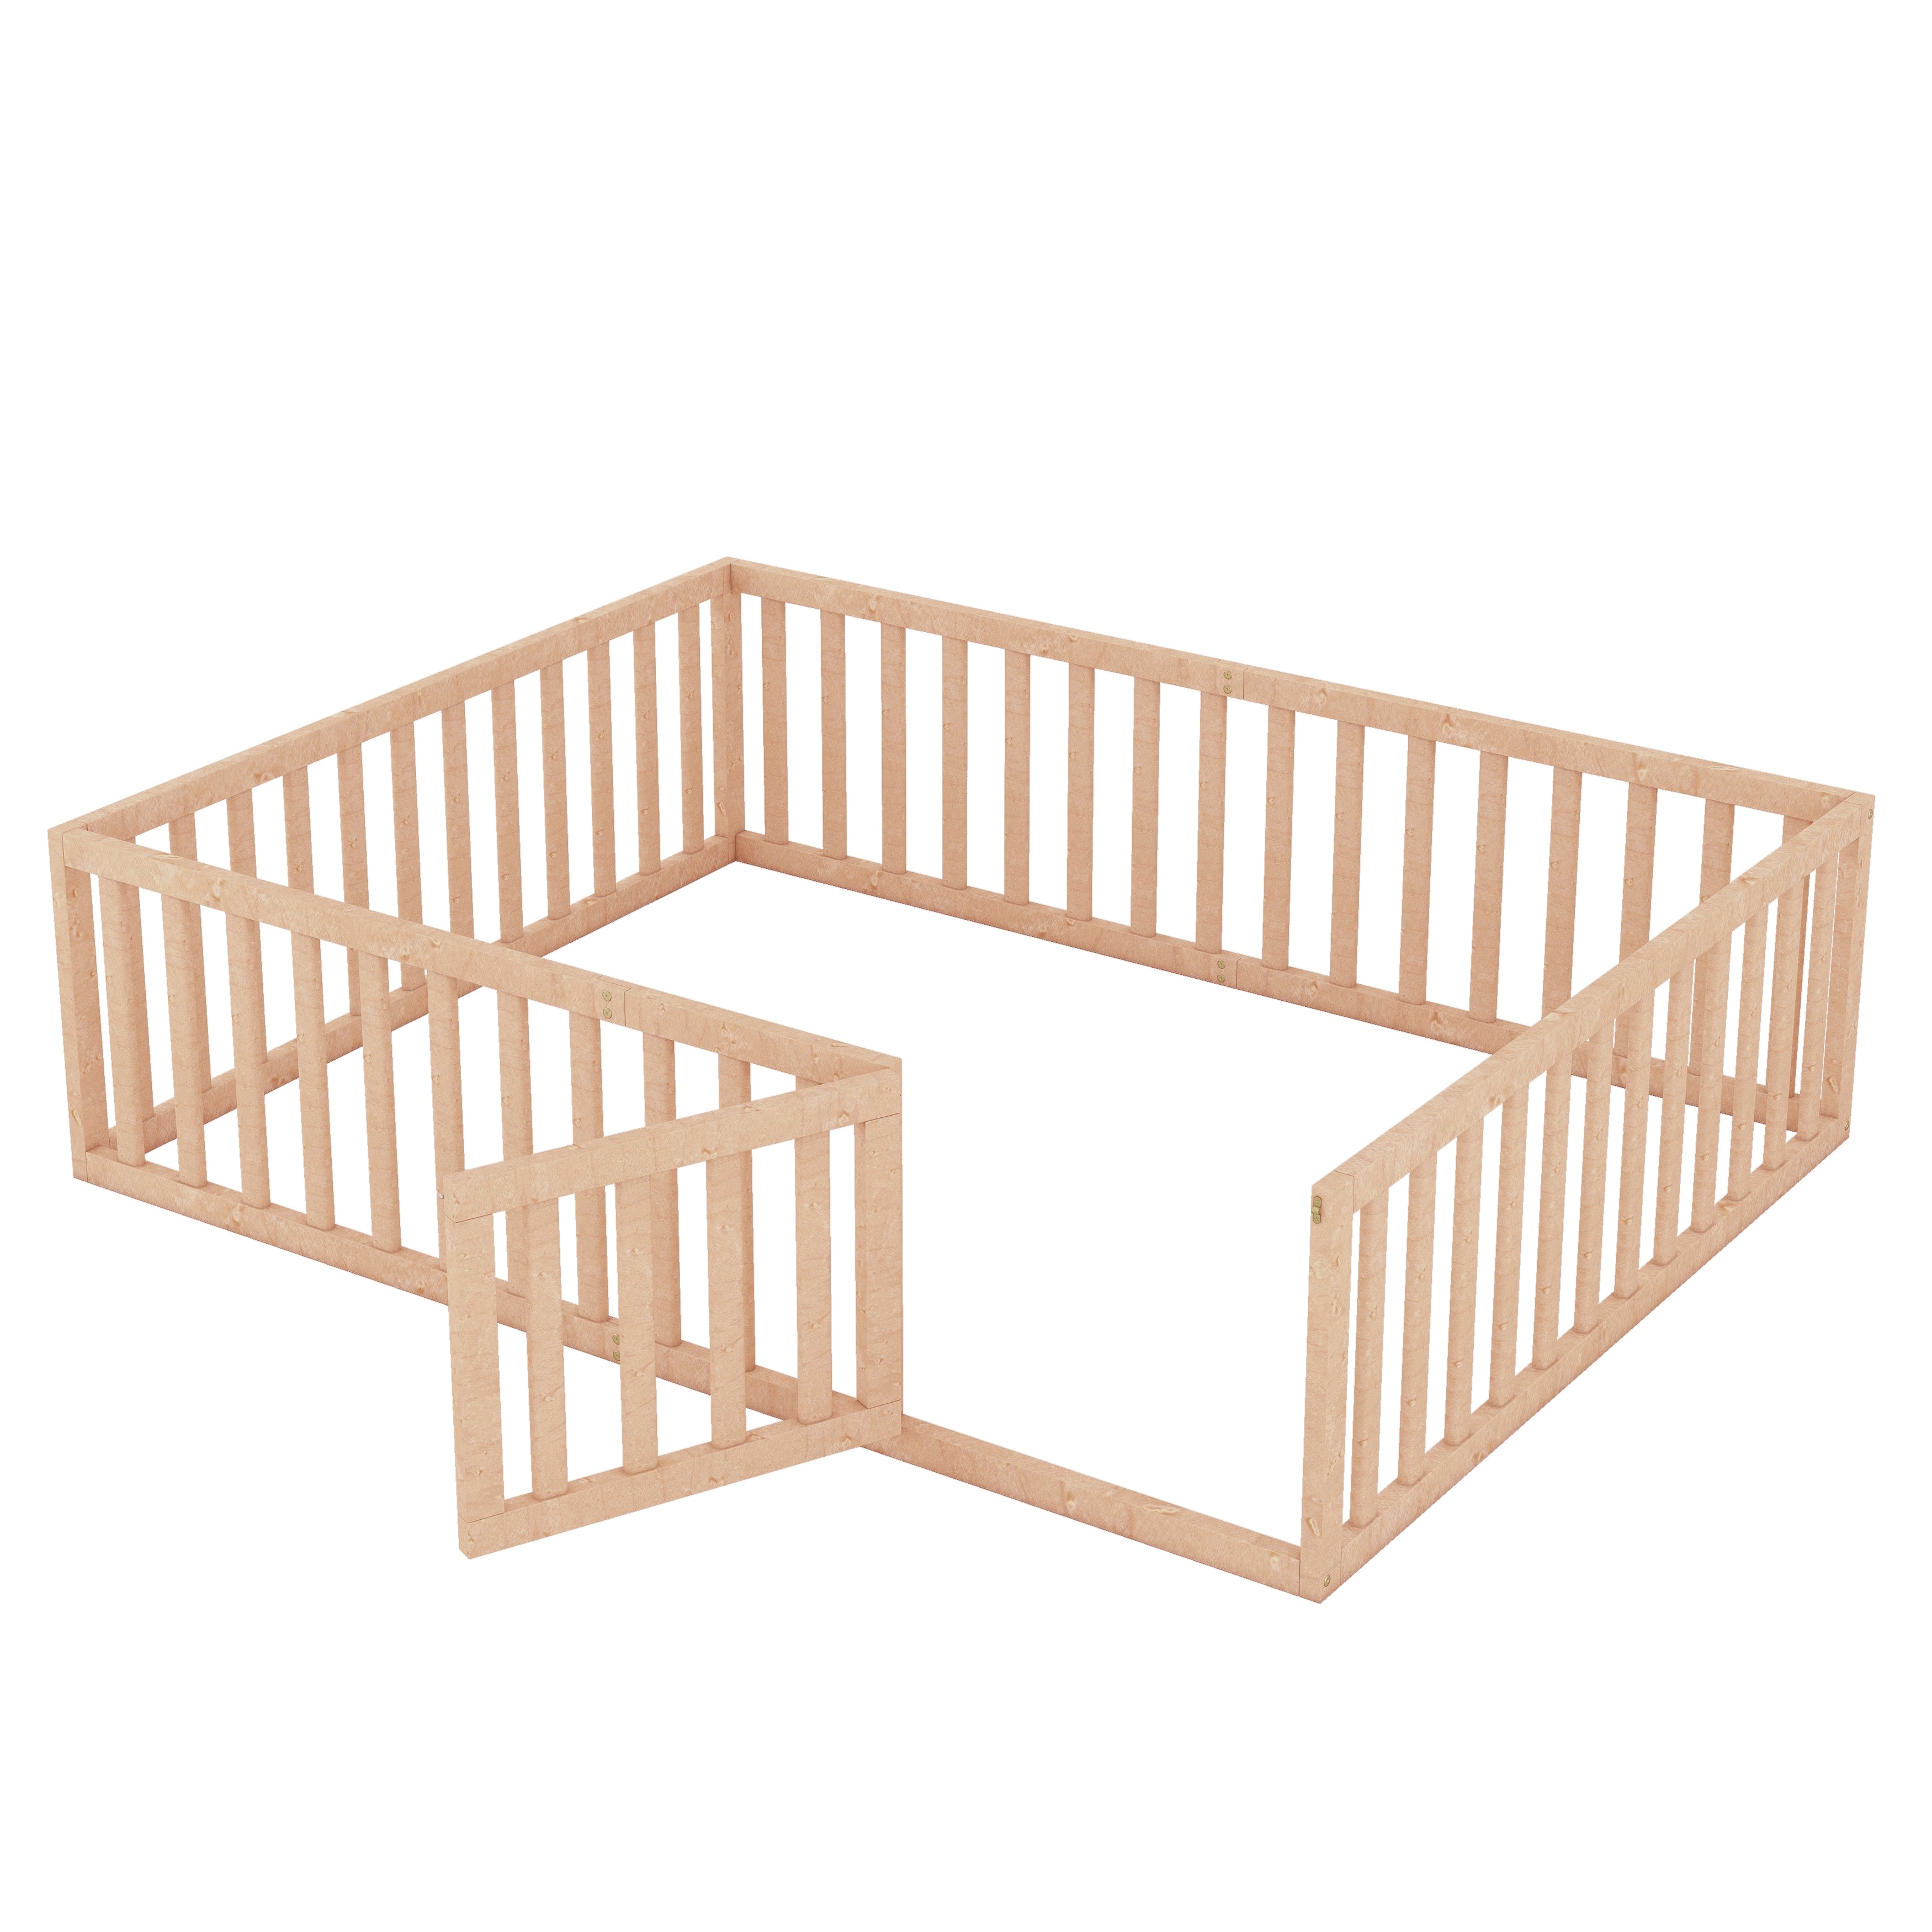 Floor Bed with Rails for Kids Wood Playhouse Bed for Kids